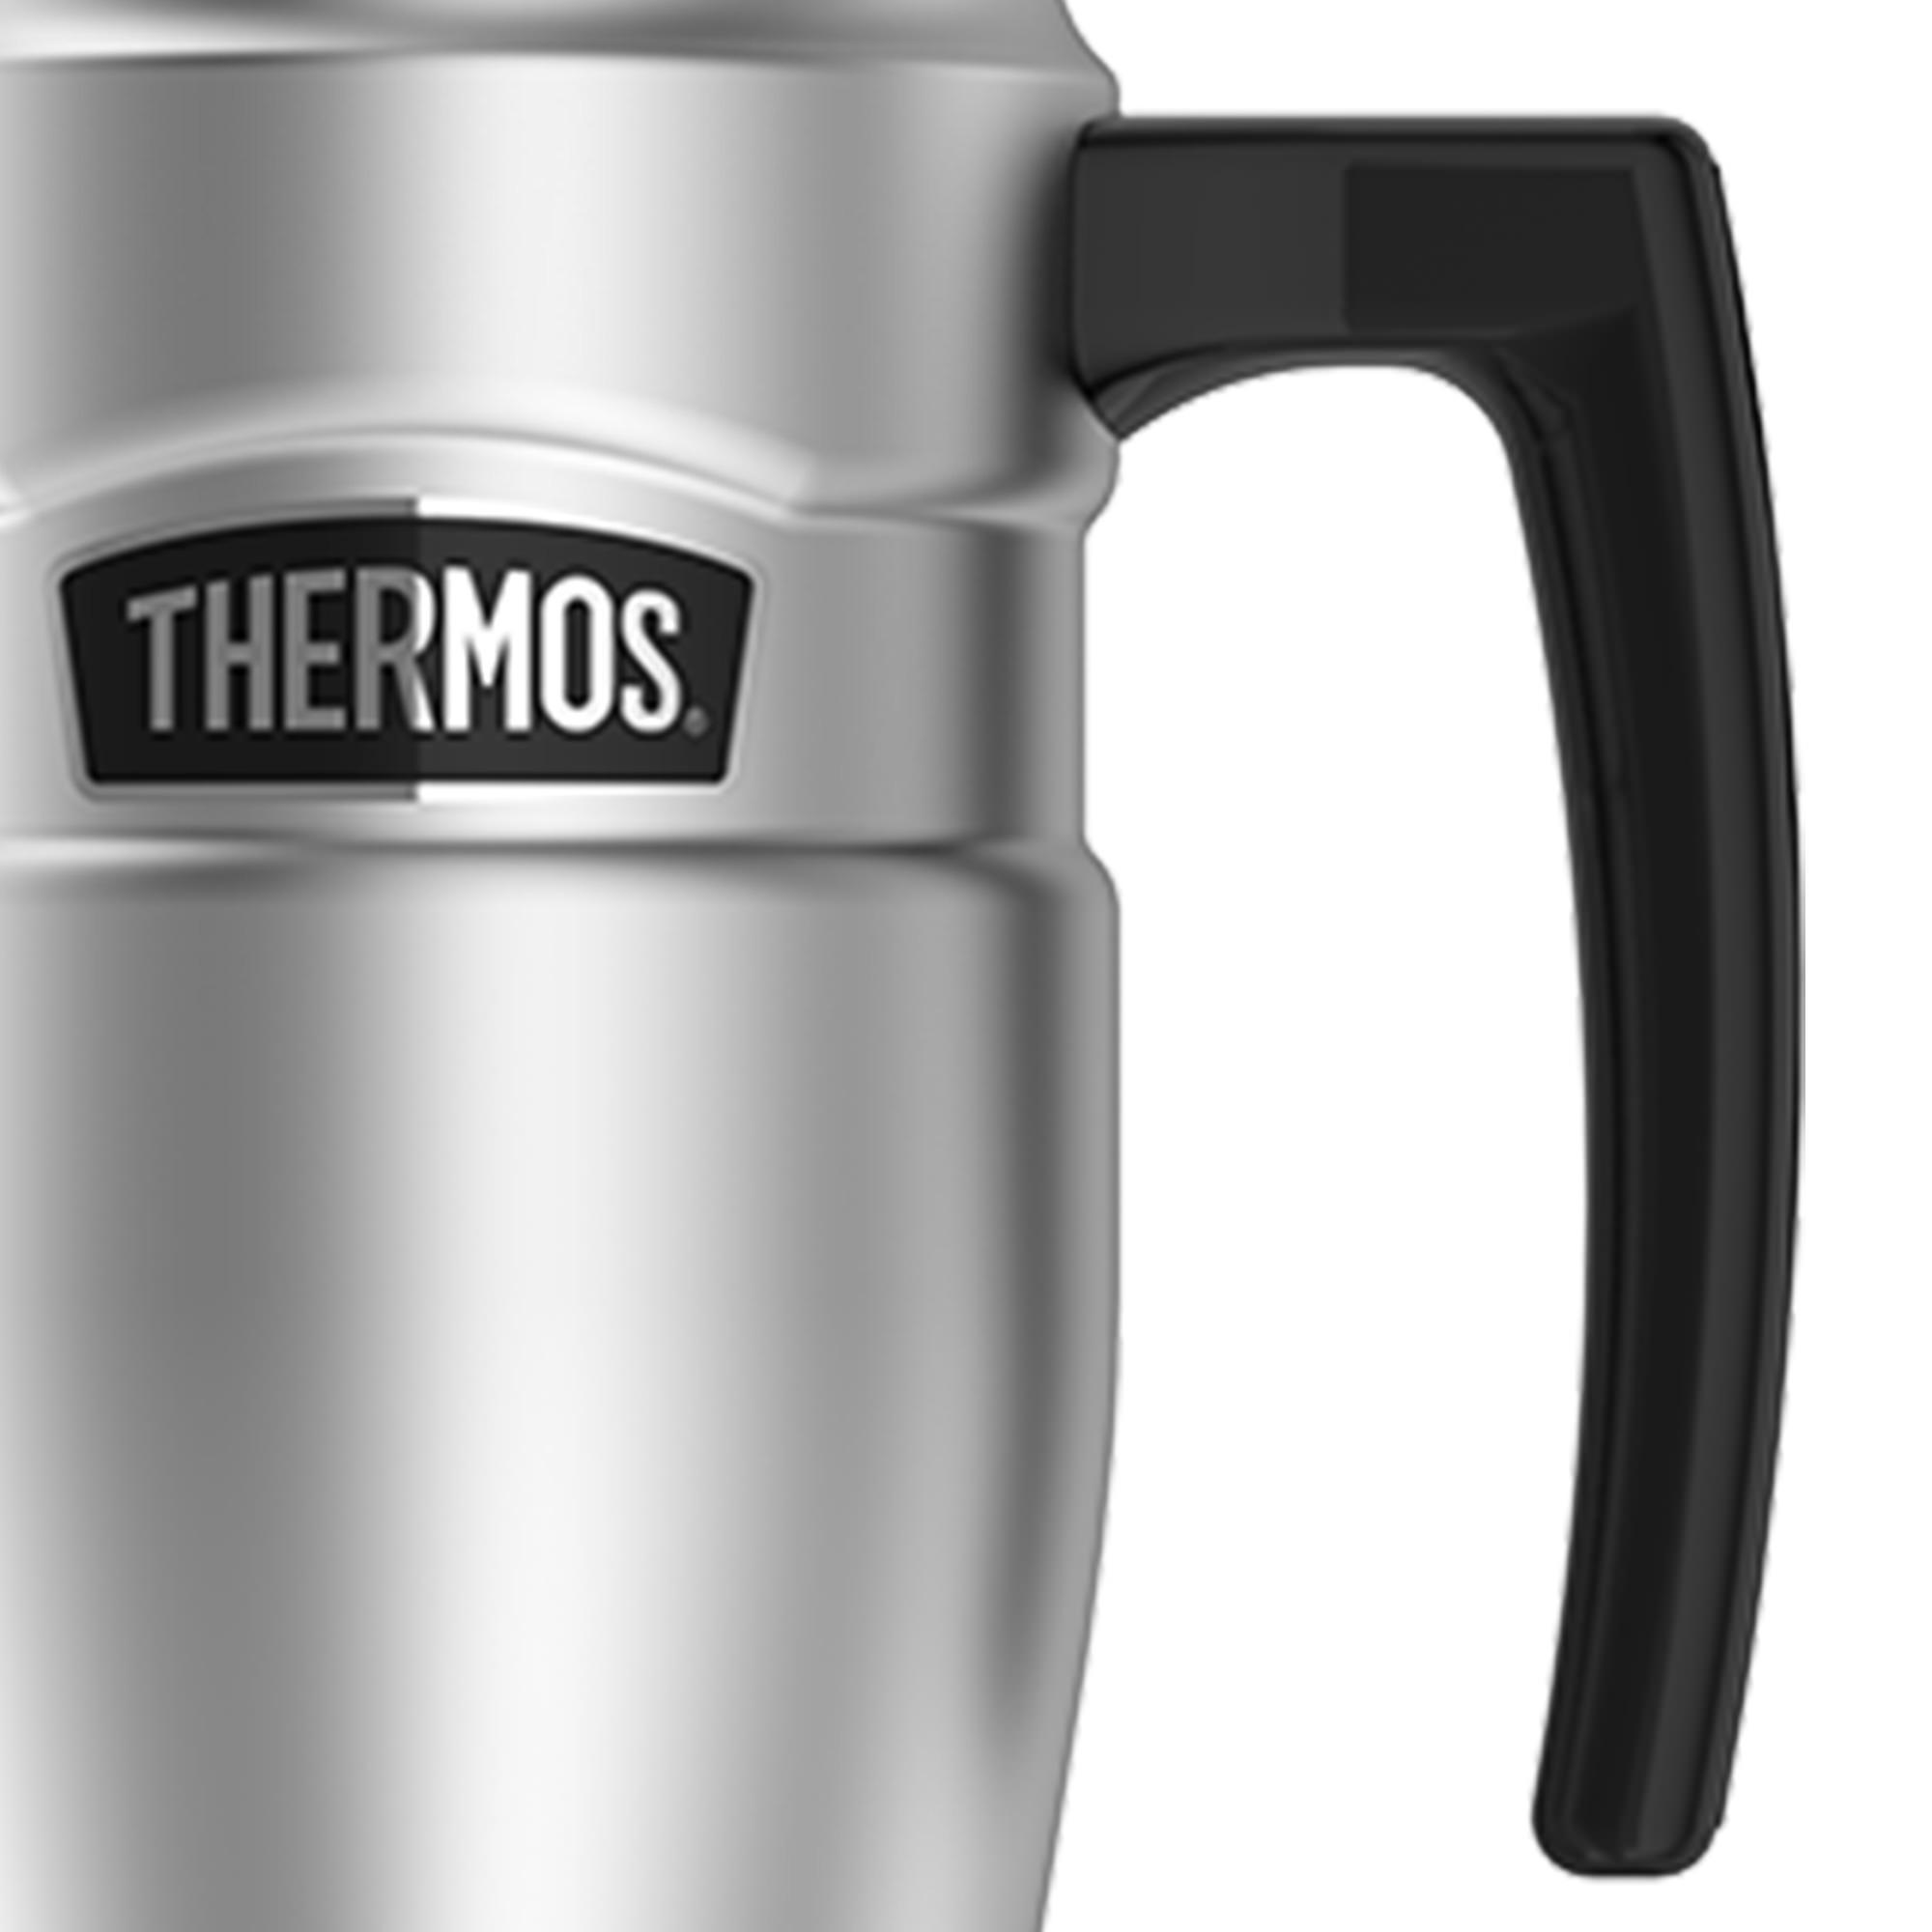 Thermos Stainless King Insulated Travel Mug 470ml Stainless Steel Image 3